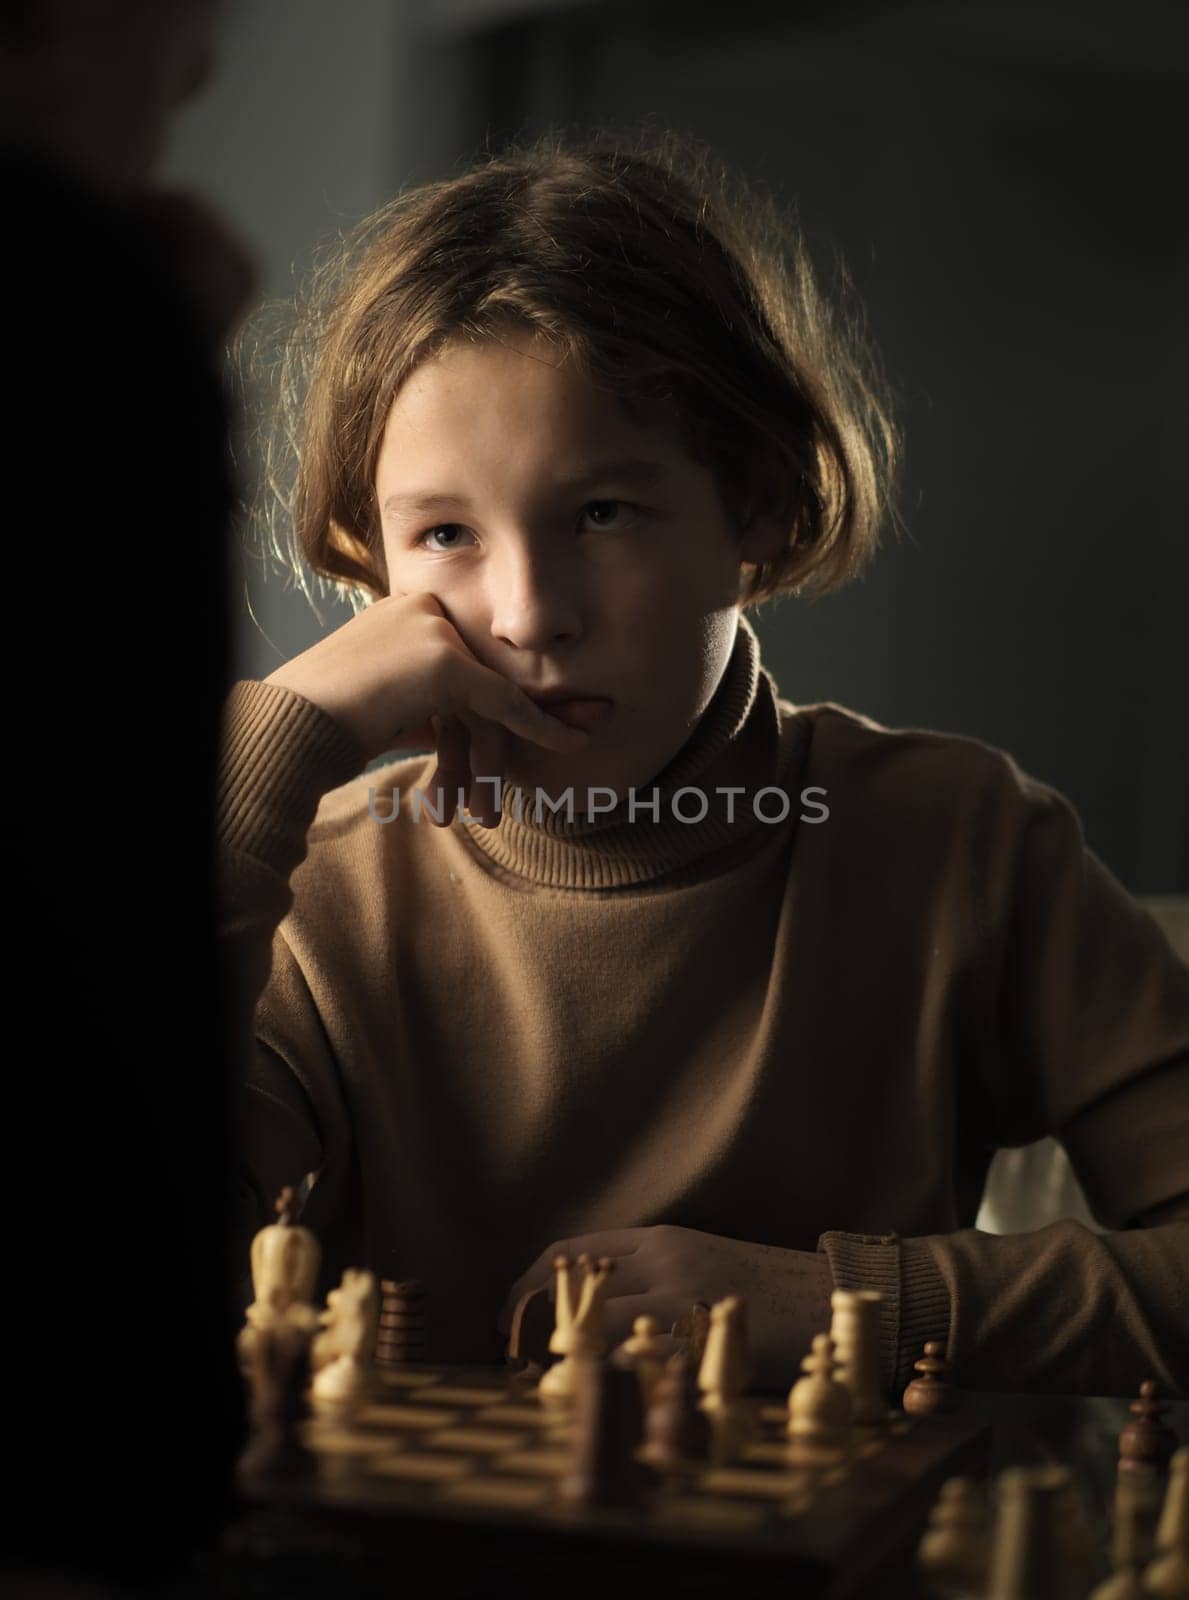 The teenager made a move while playing chess by gcm